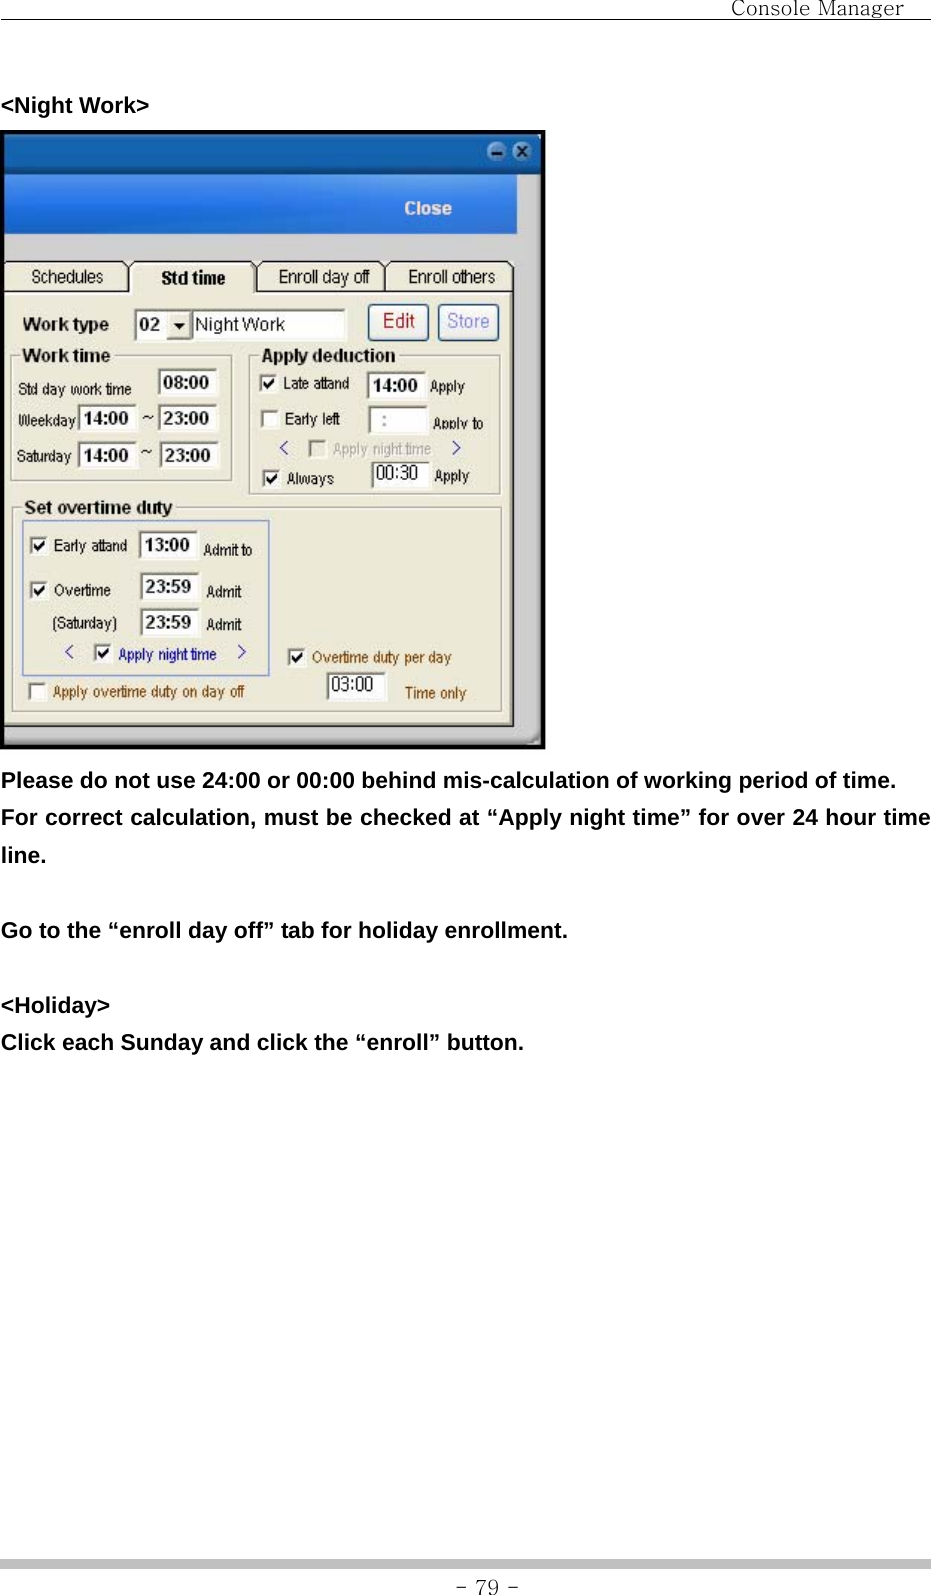                                Console Manager               - 79 -&lt;Night Work&gt;  Please do not use 24:00 or 00:00 behind mis-calculation of working period of time. For correct calculation, must be checked at “Apply night time” for over 24 hour time line.  Go to the “enroll day off” tab for holiday enrollment.  &lt;Holiday&gt; Click each Sunday and click the “enroll” button.  